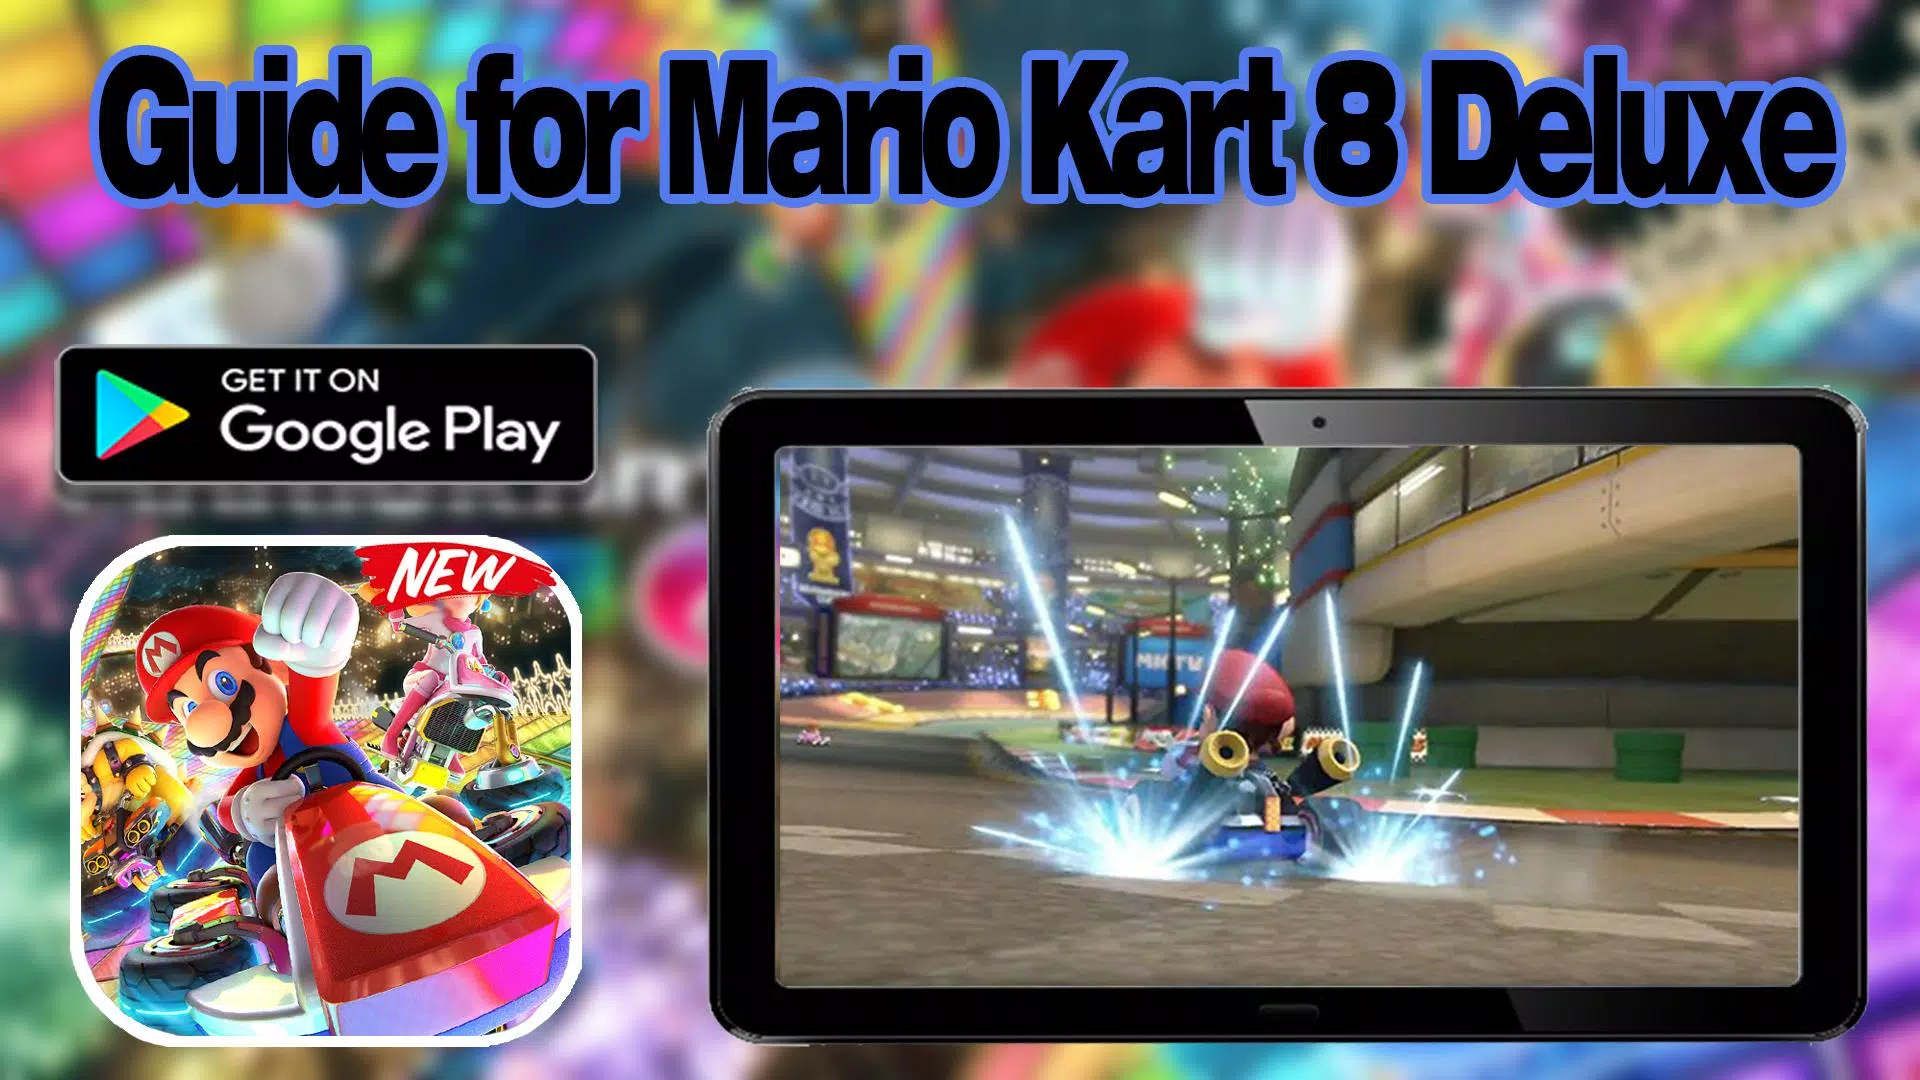 Mario Kart APK for Android Download